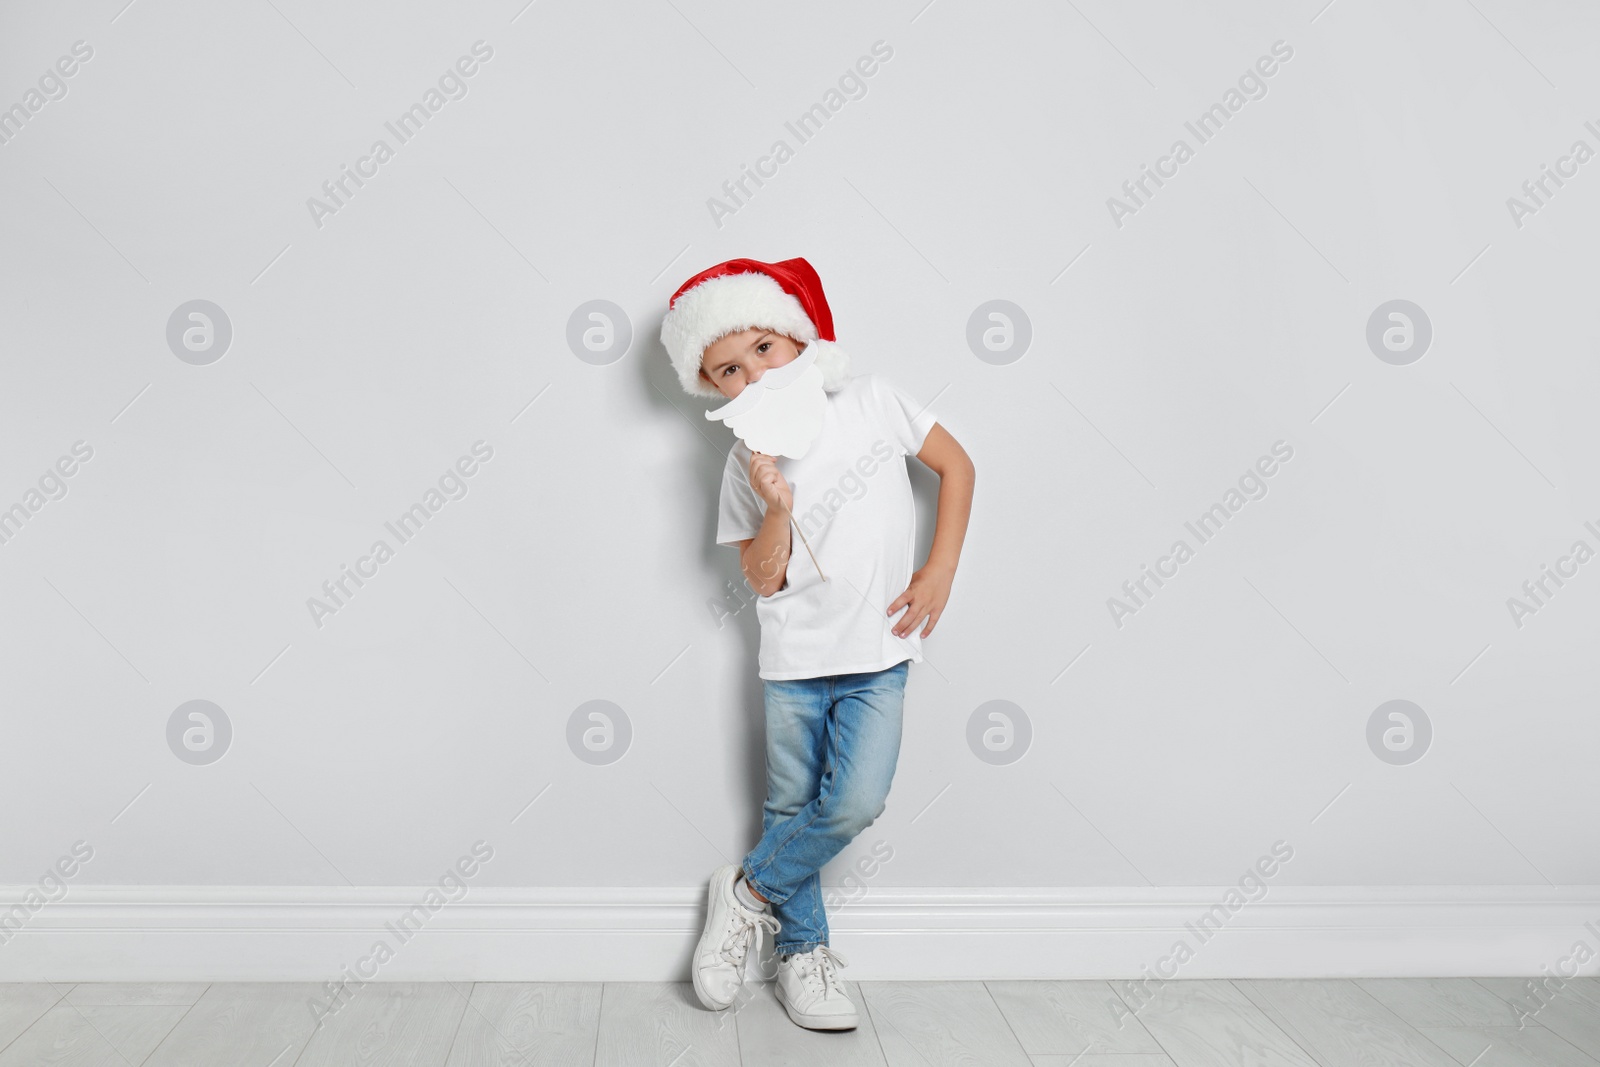 Image of Cute little boy with Santa hat and white beard prop near white wall. Christmas celebration